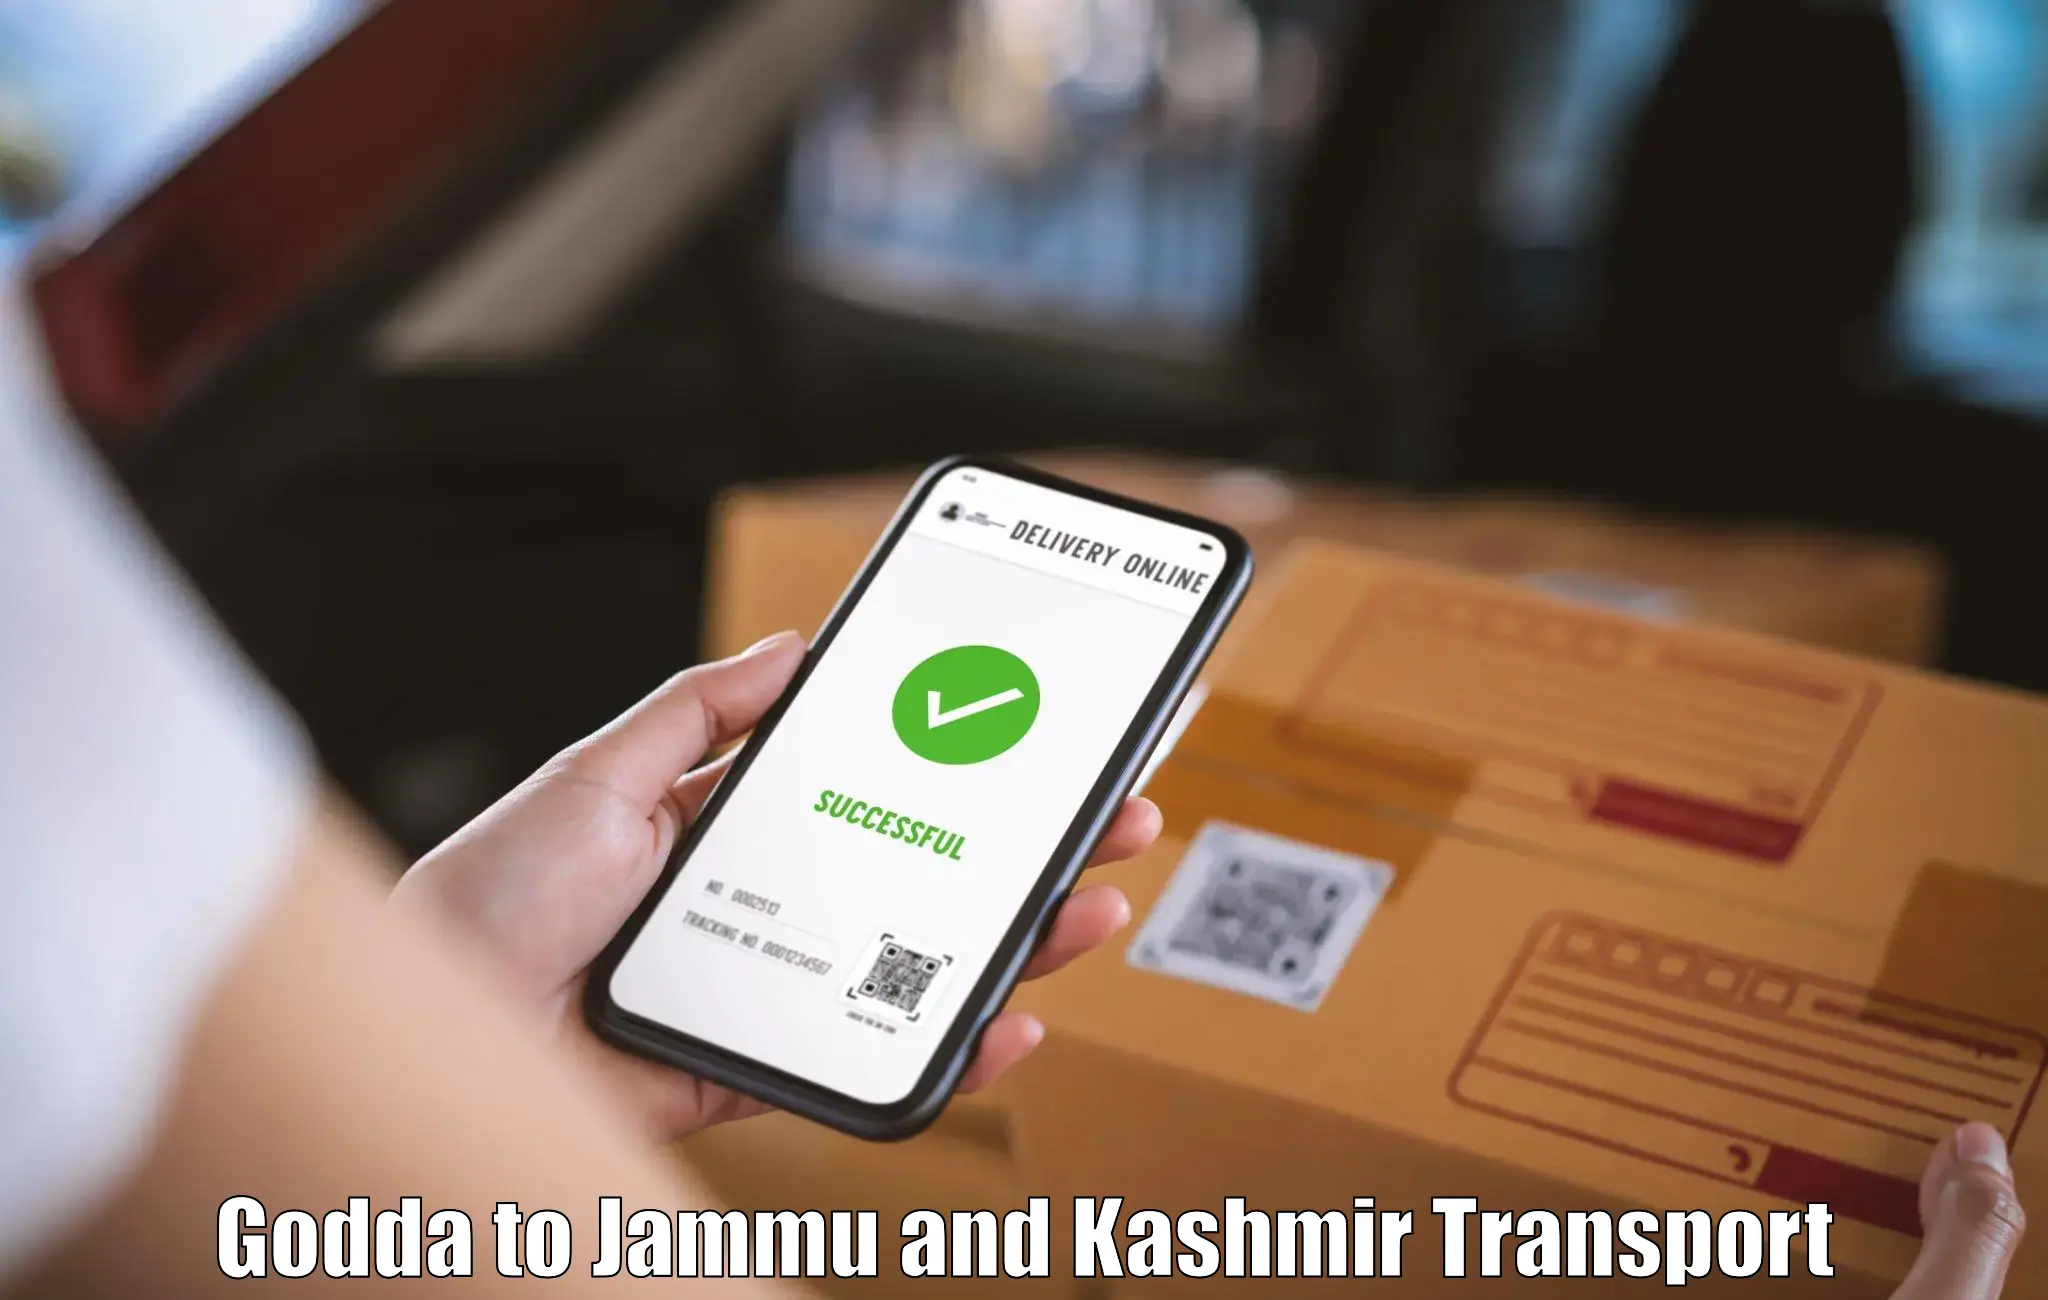 Package delivery services Godda to Kulgam